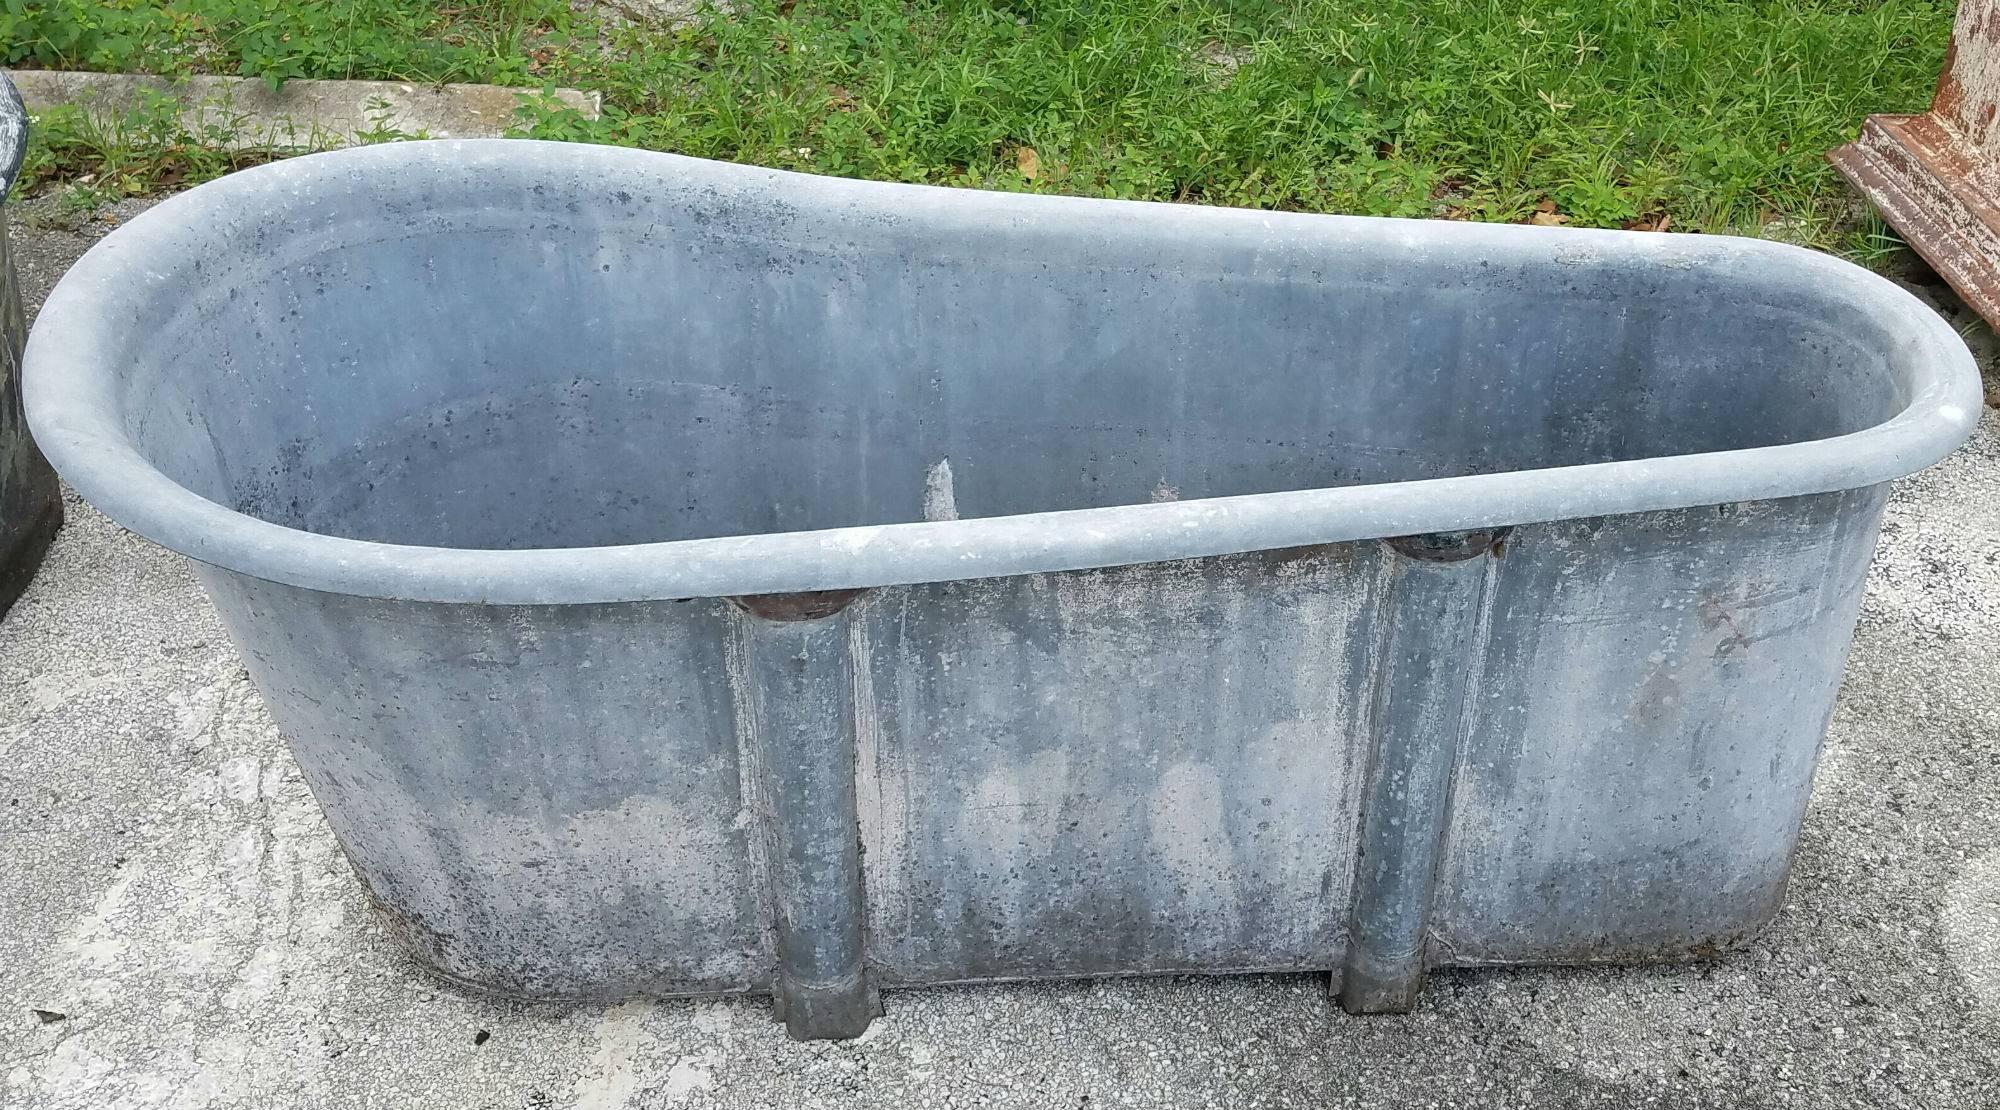 French Empire zinc bathtub. The outside foot of the bathtub has the original seal. 

These make great outdoor garden jardinières.